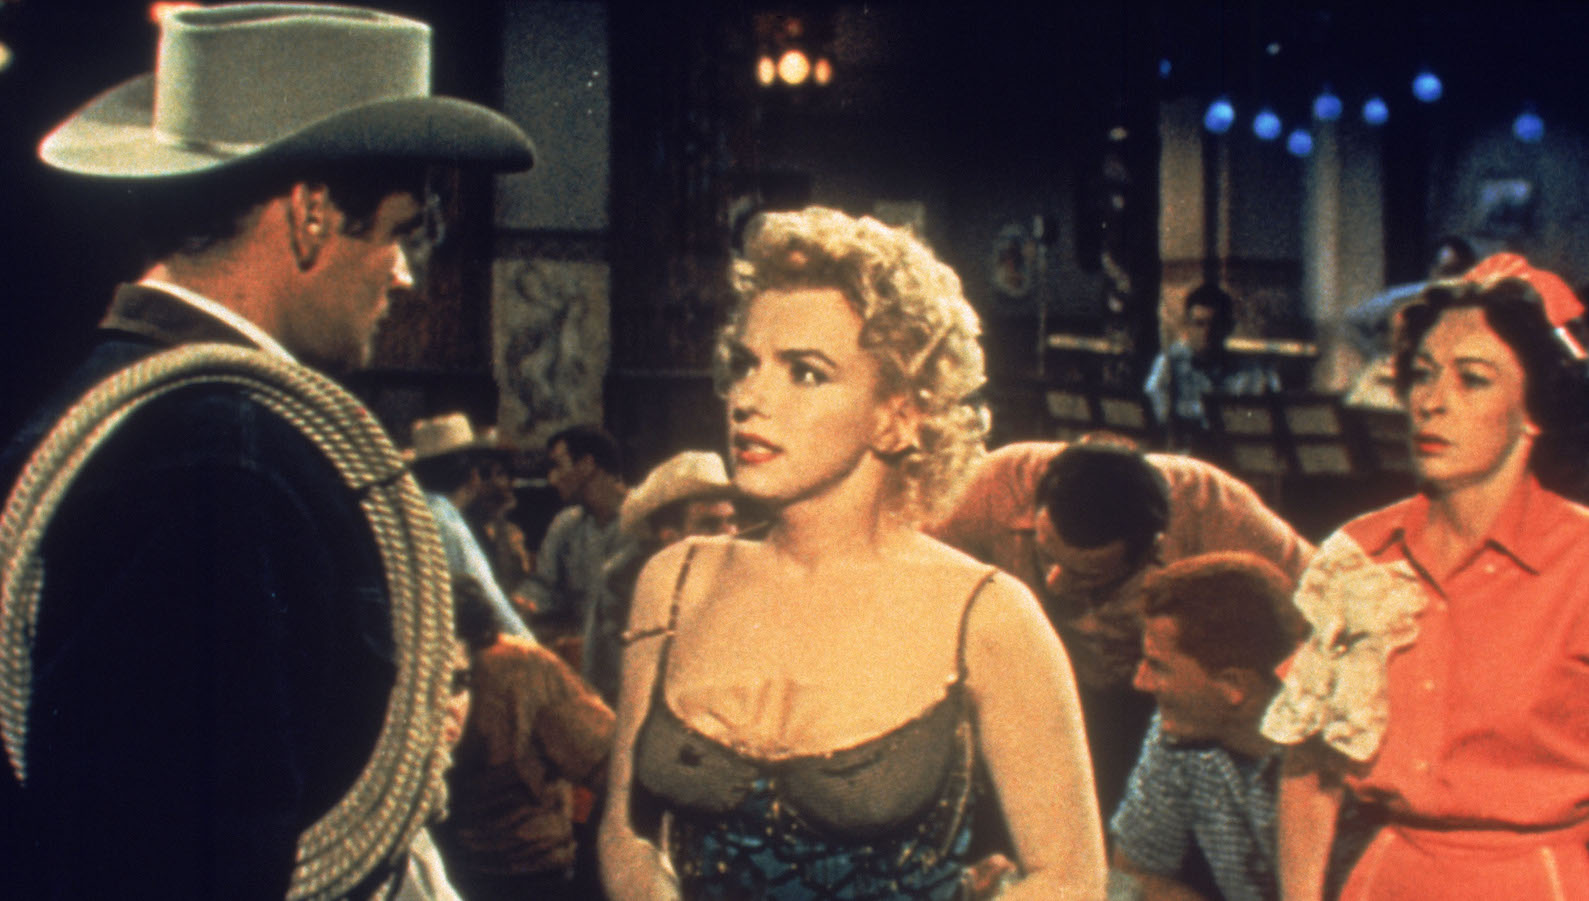 A blonde woman in a low-cut brown top talks intensely to a man in a cowboy hat and holding a coiled lasso rope over his shoulder